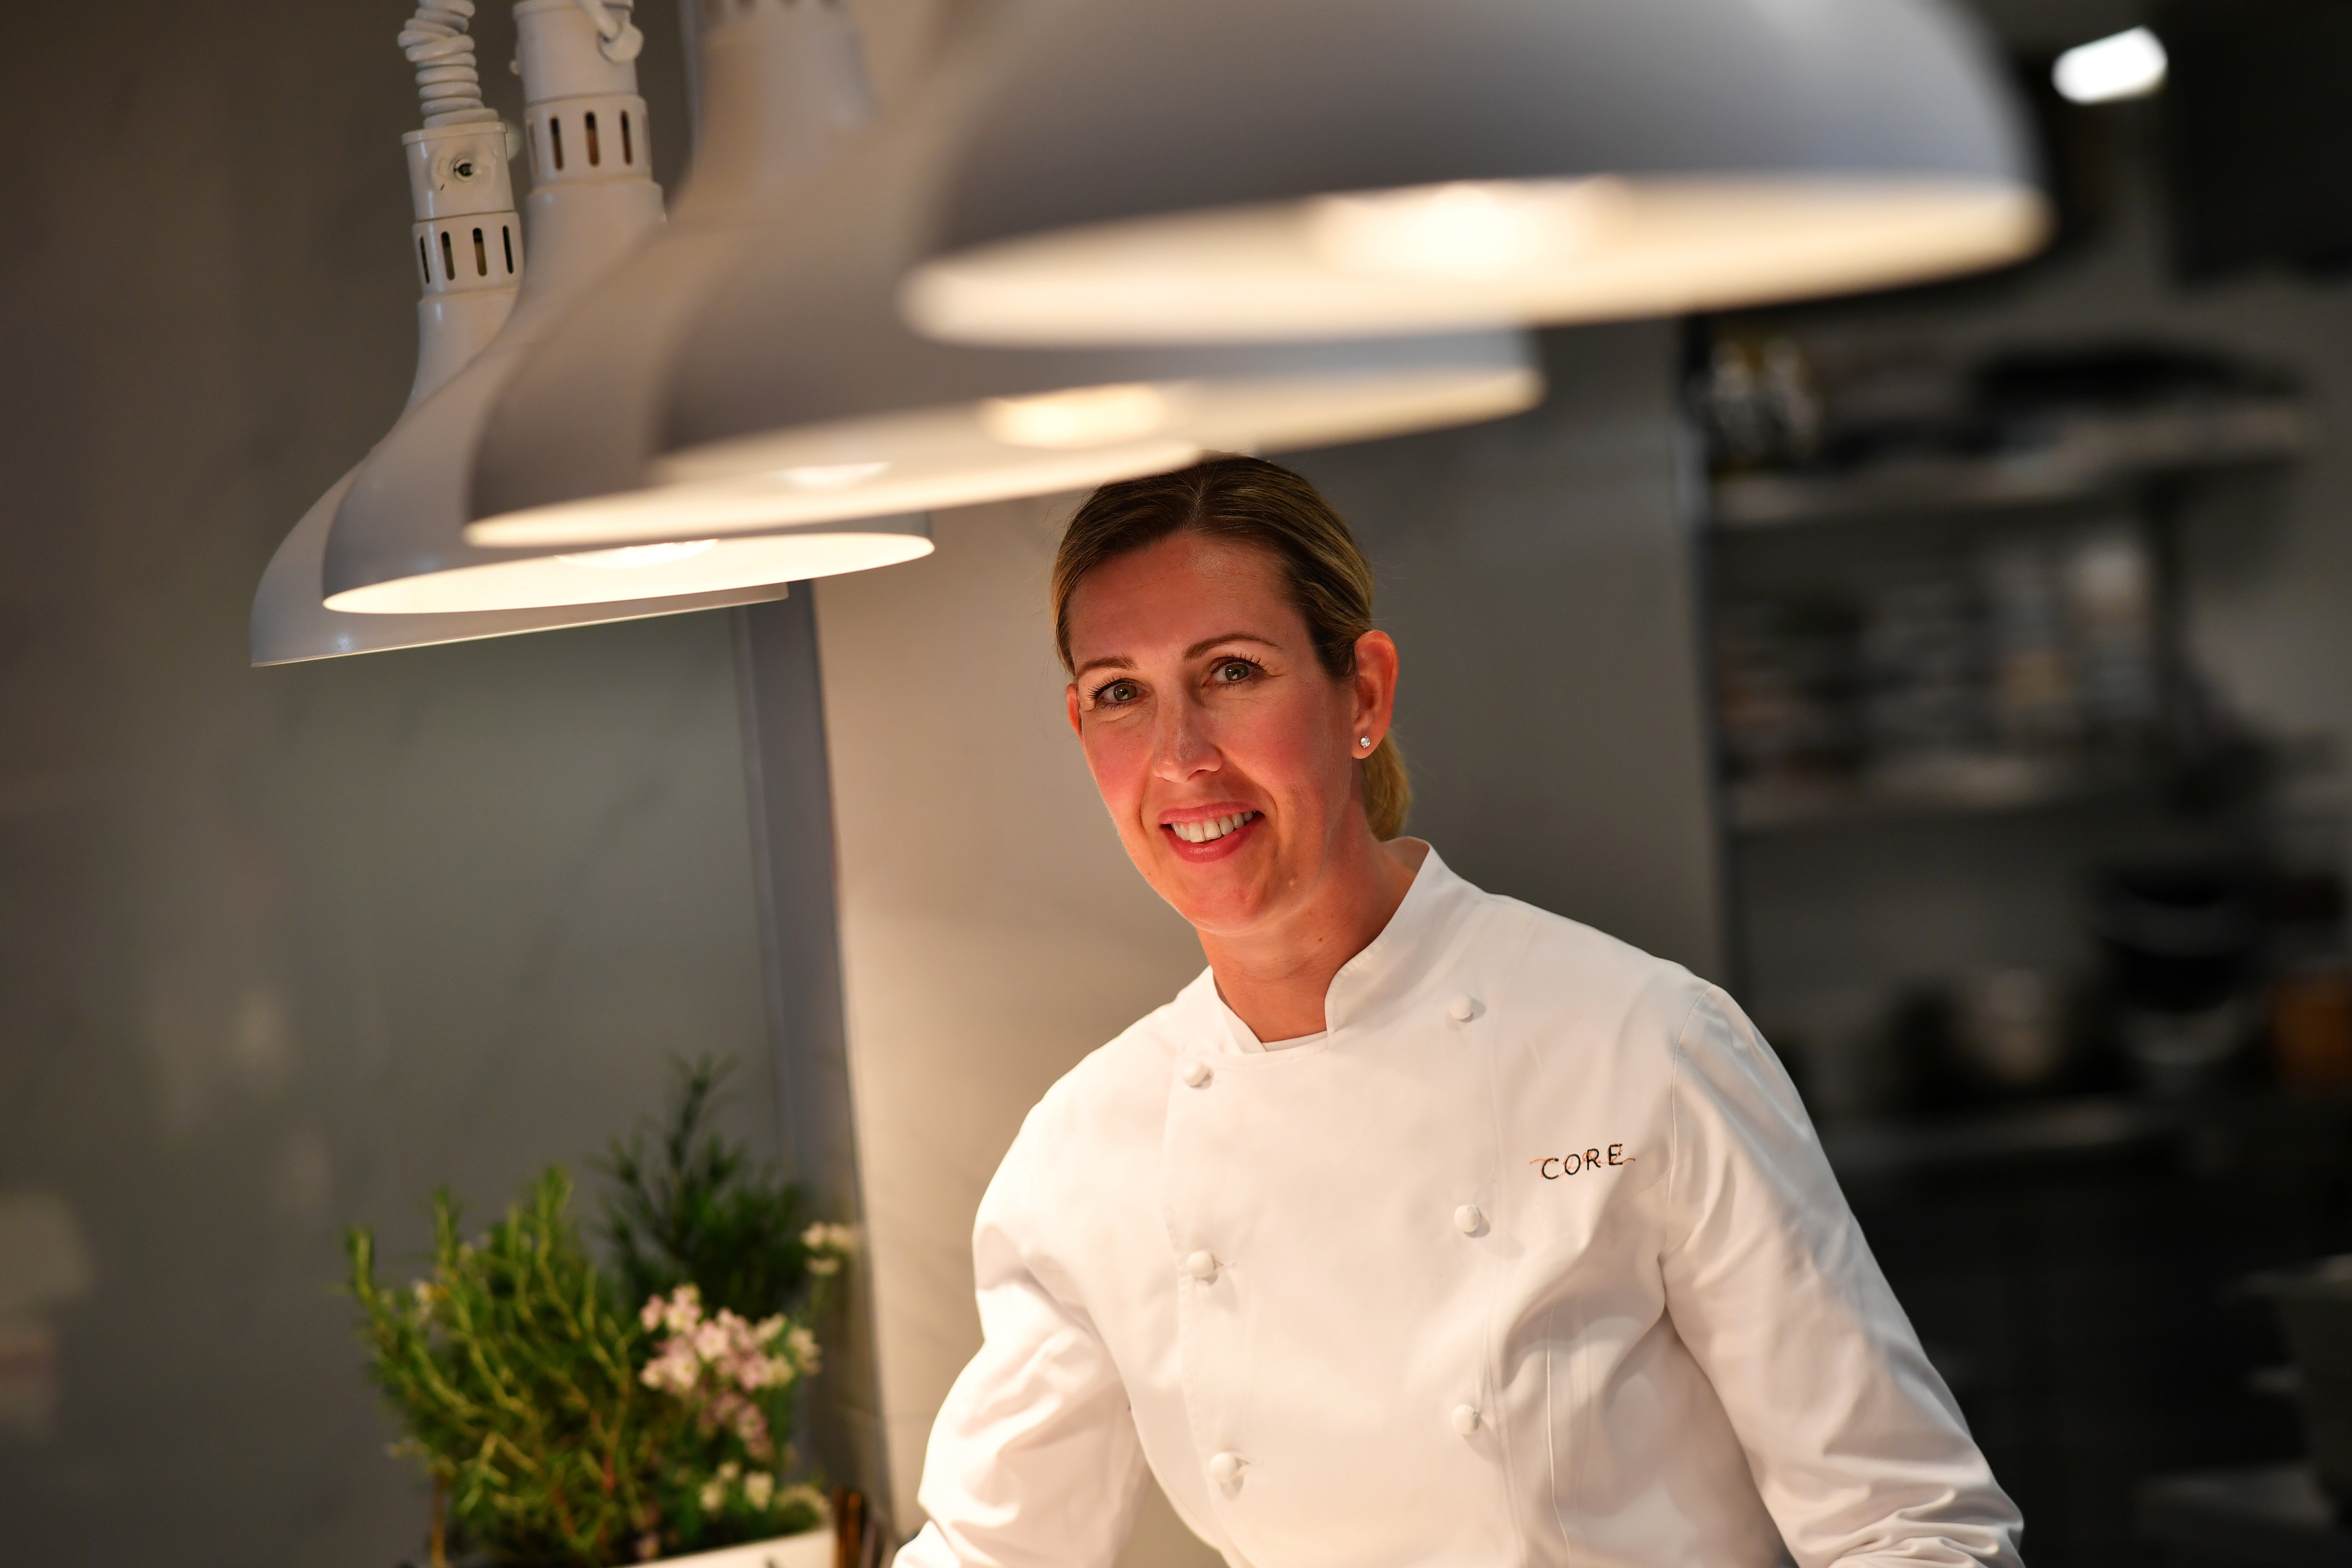 Britain's newest winner of three Michelin stars, Clare Smyth smiles at her Core restaurant in London